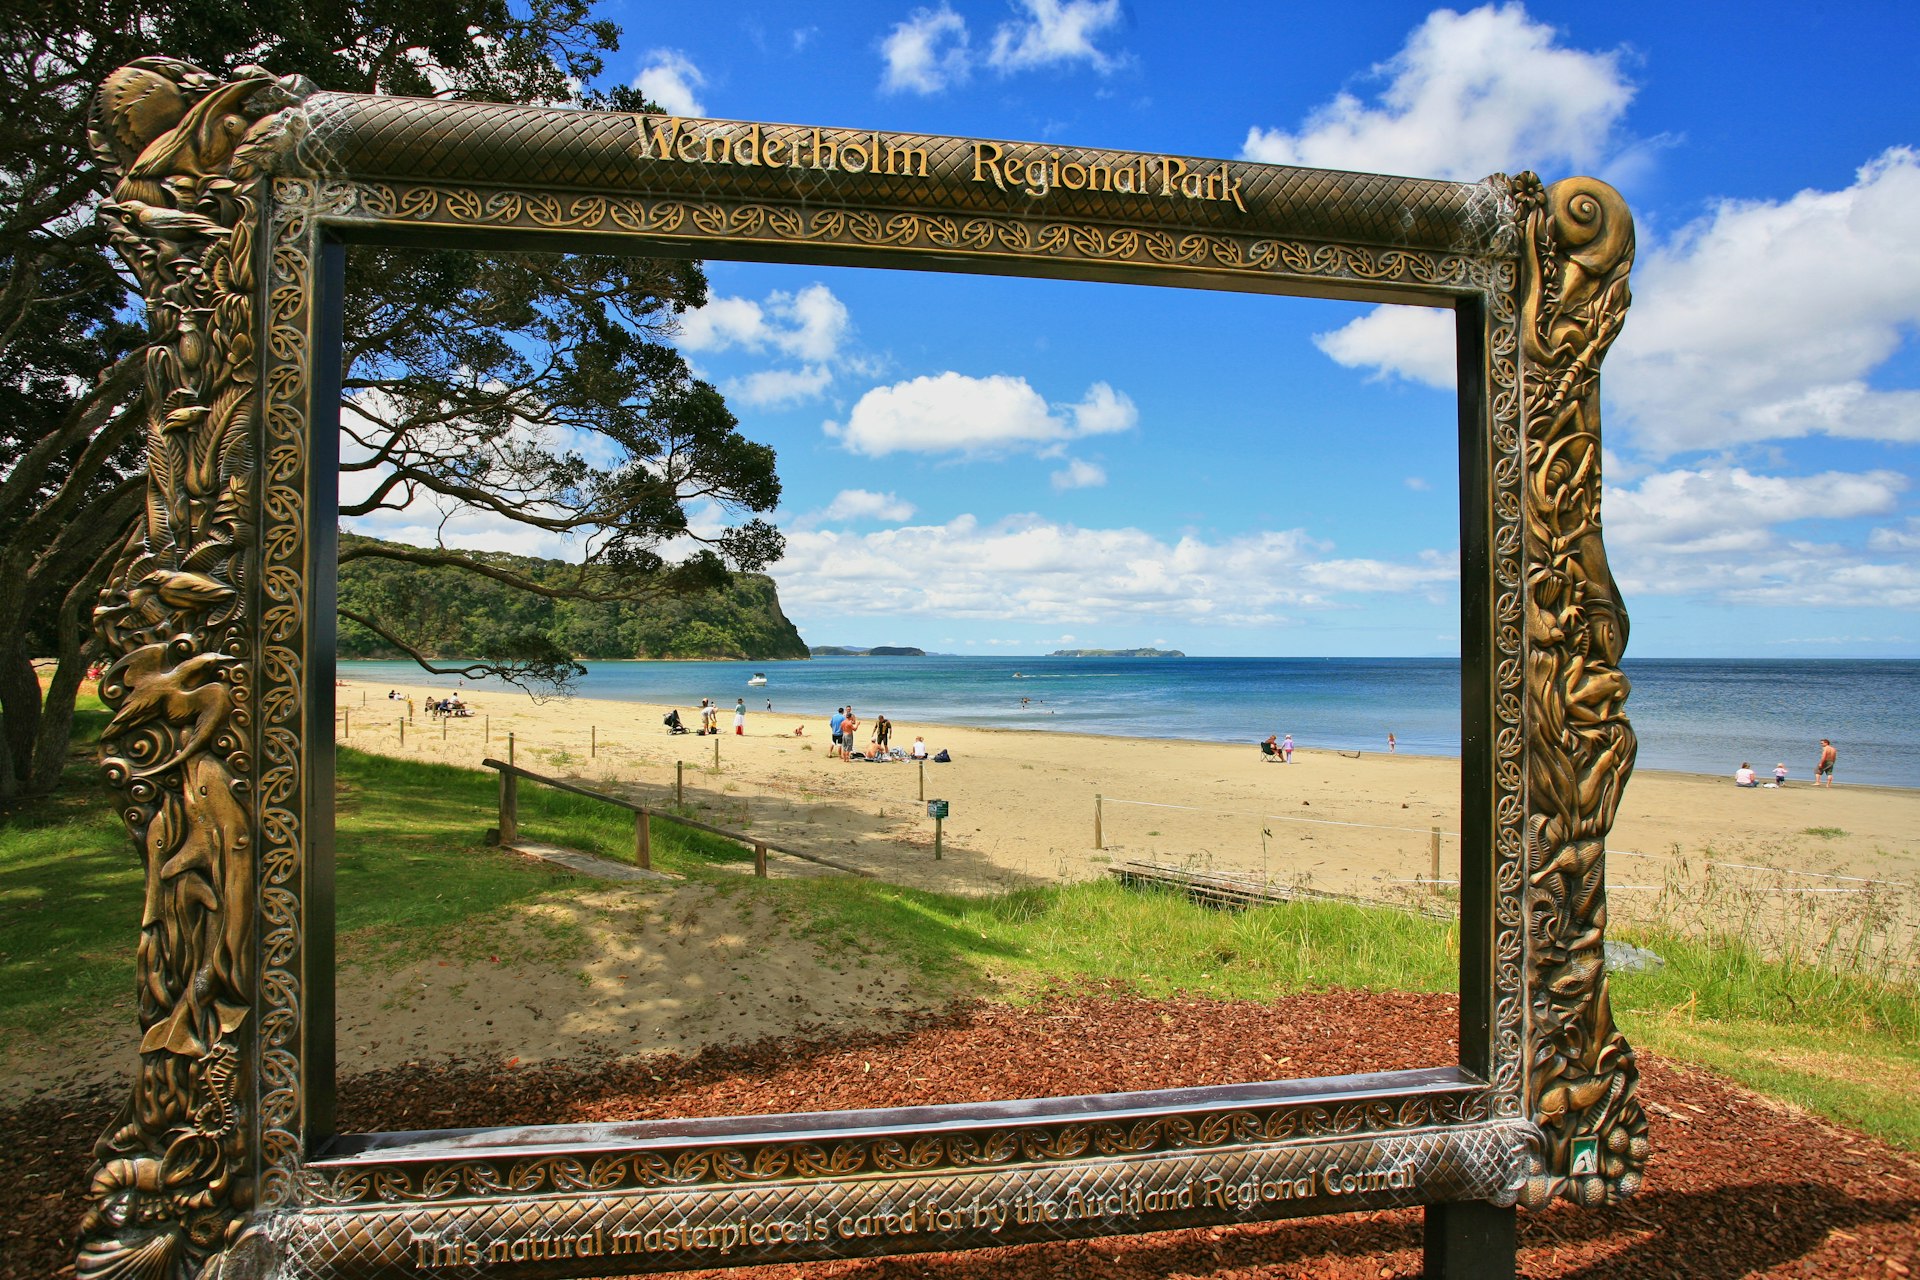 View of the beach at Wenderholm Regional Park near Auckland